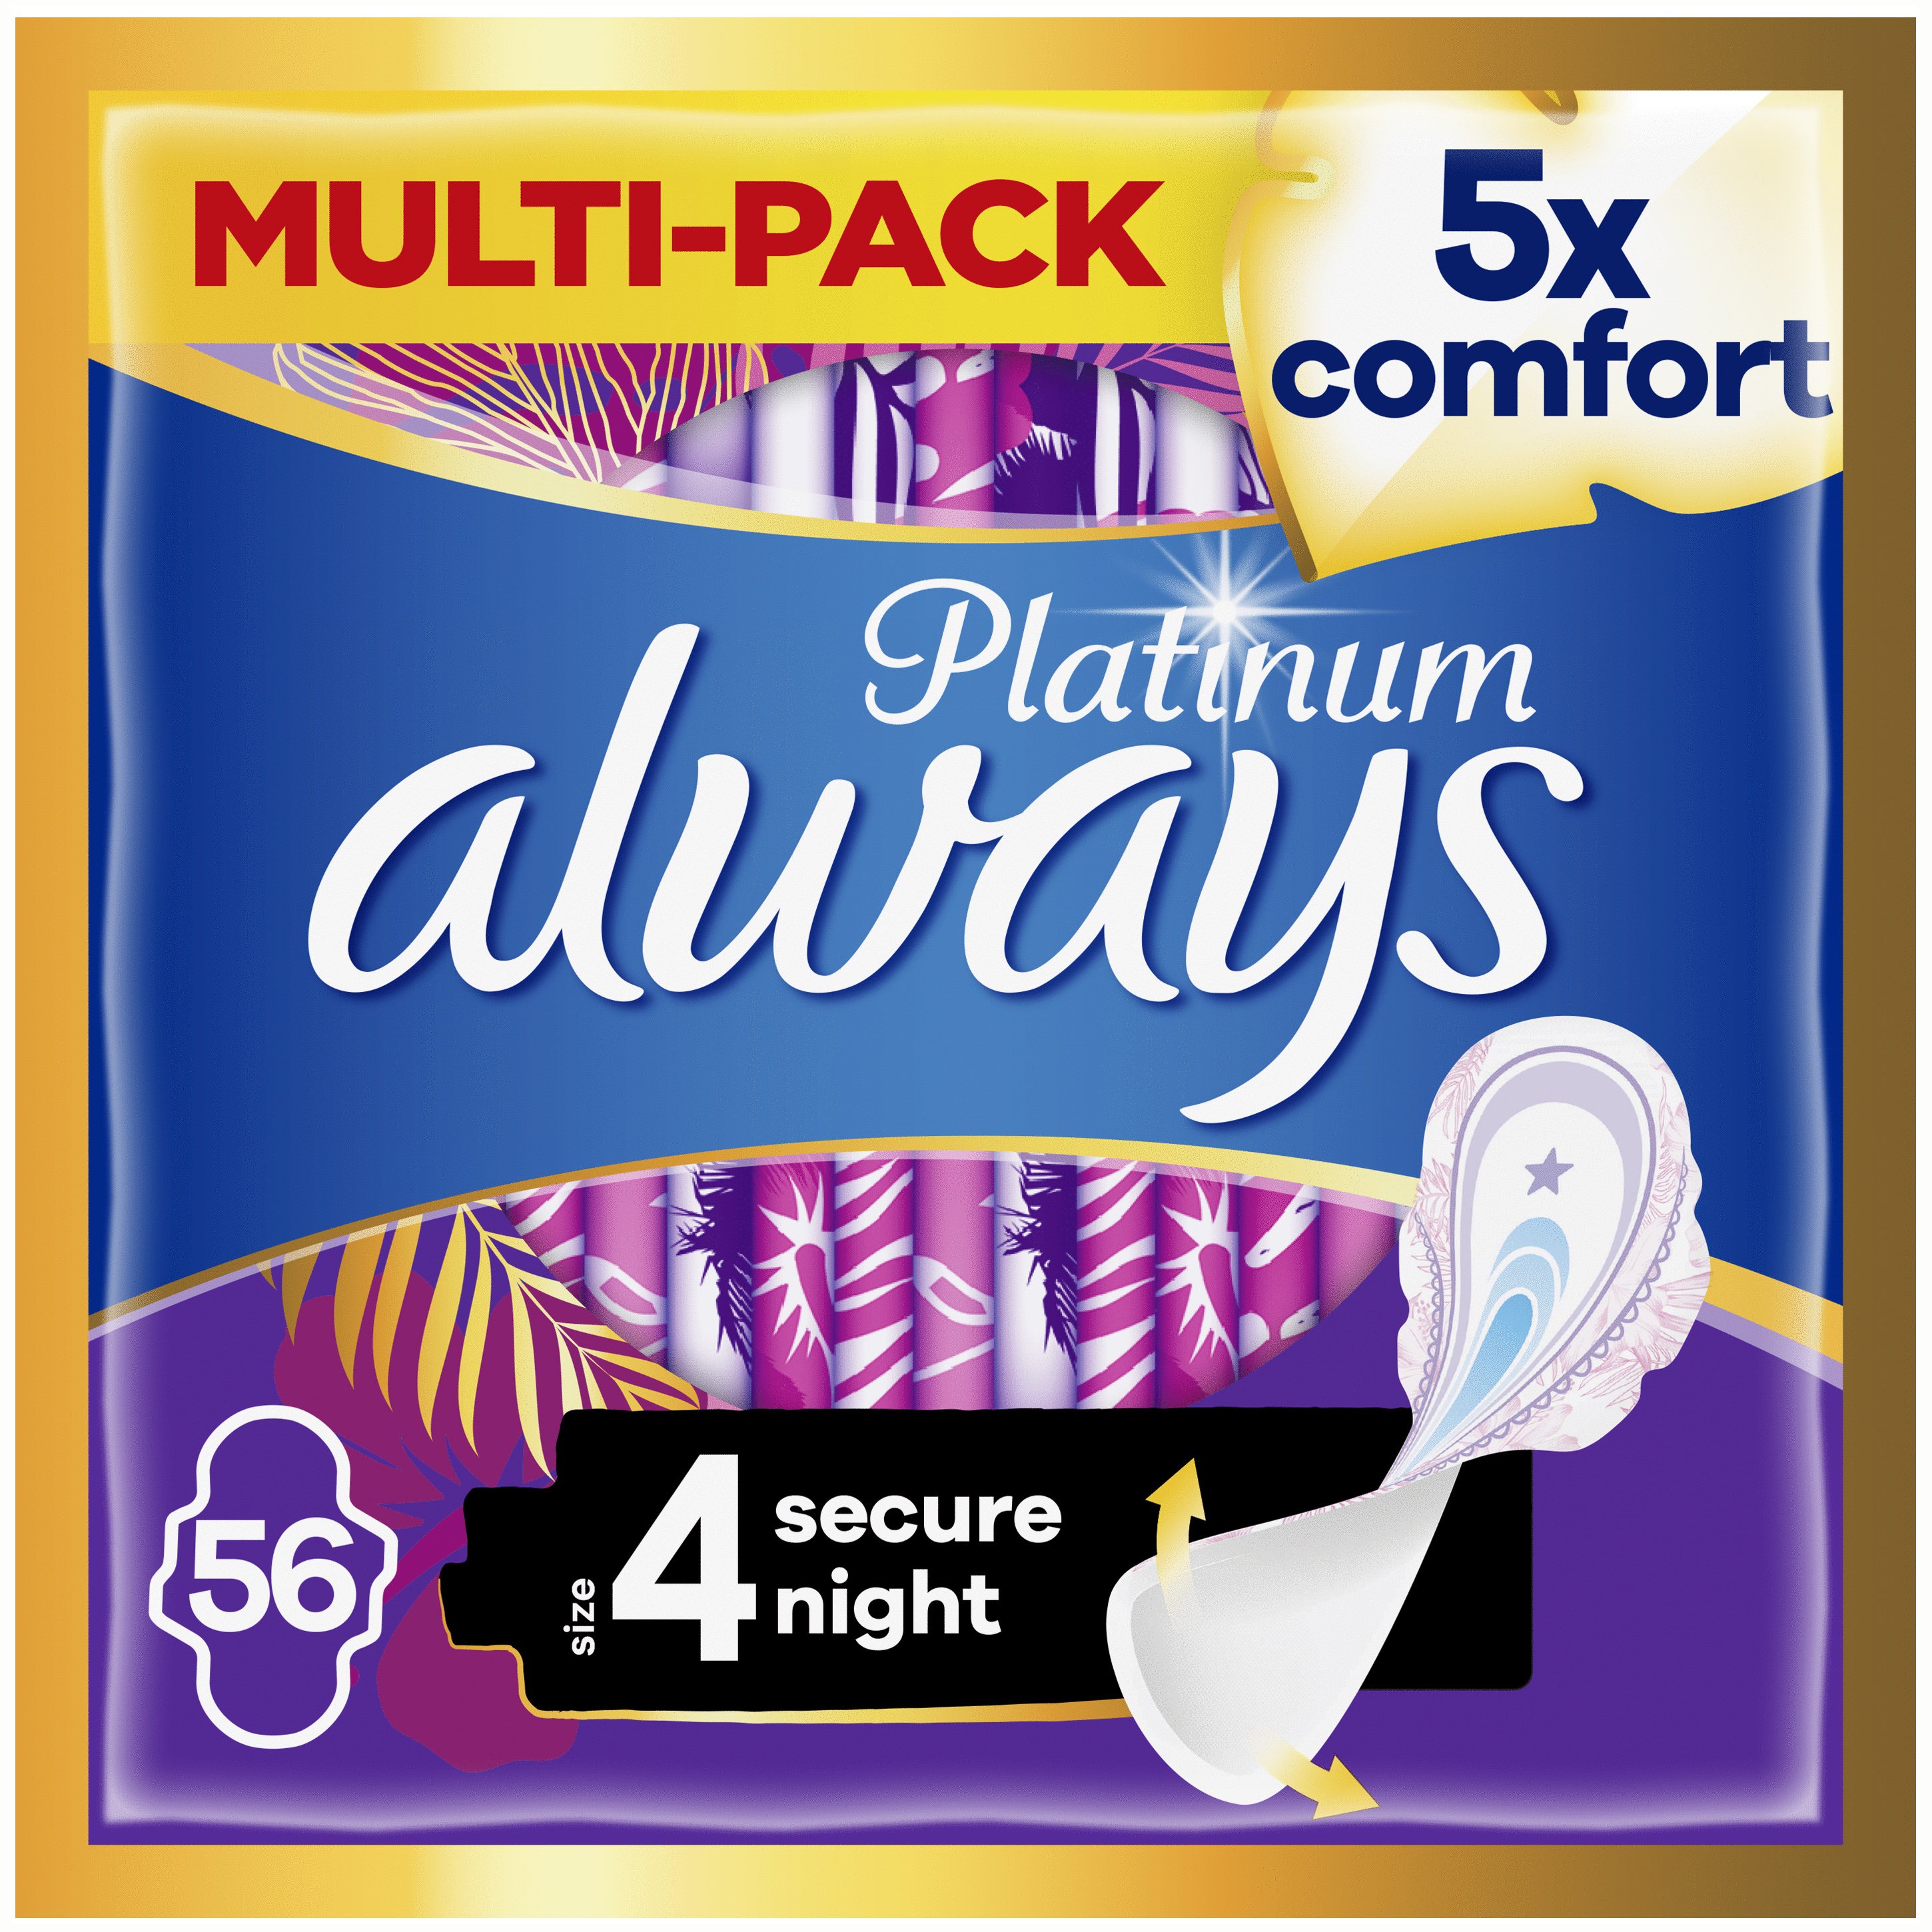 Always Promo Multi-Pack Platinum Secure Night Sanitary Towels with Wings Σερβιέτες με Φτερά για Πενταπλάσια Άνεση & Προστασία τη Νύχτα Size 4, 56 Τεμάχια